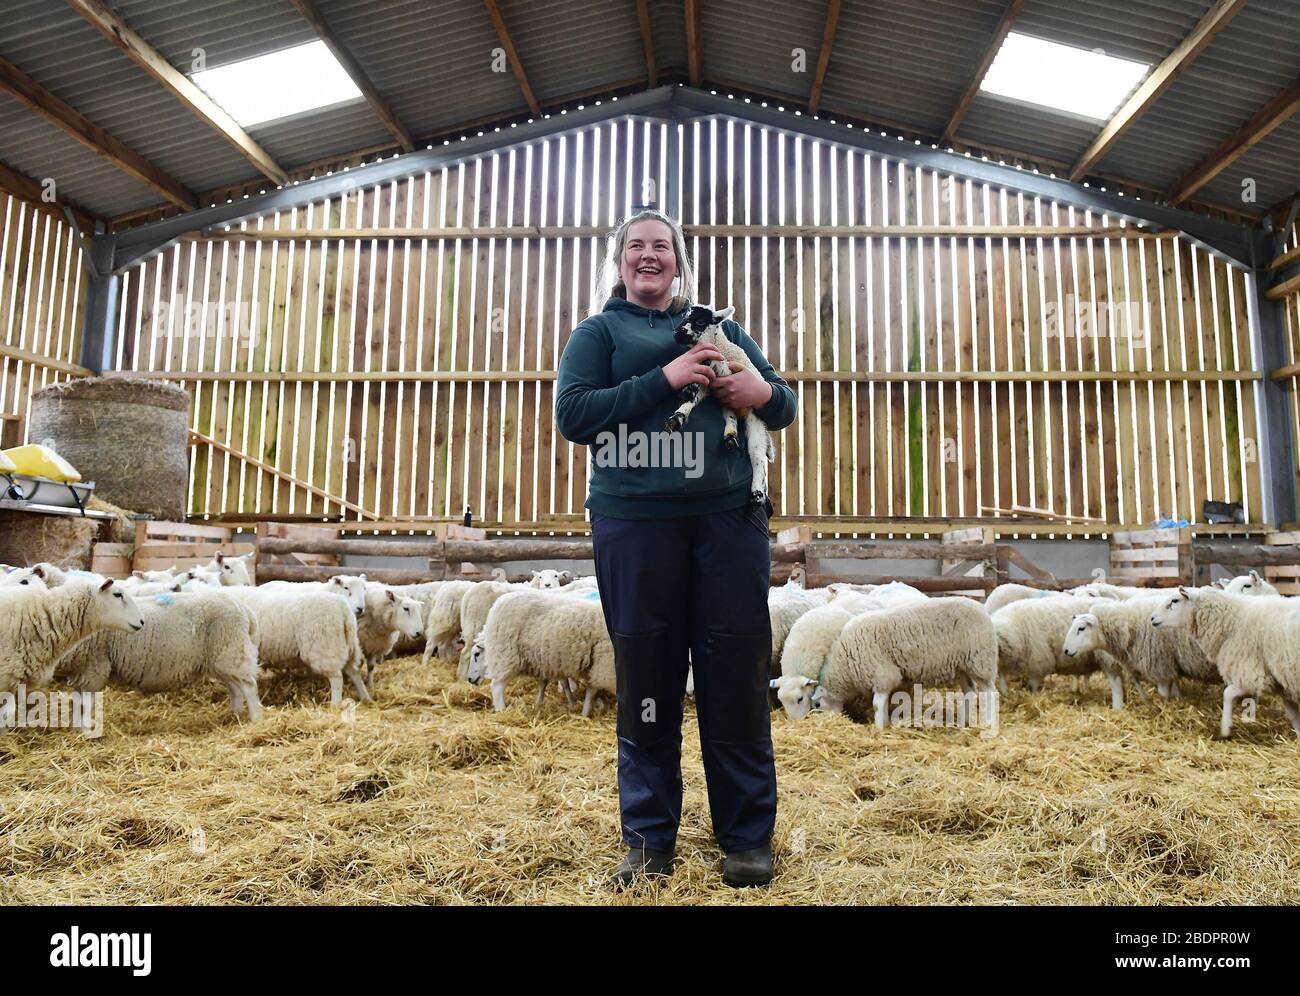 EDITORIAL USE ONLY Chloe Malcolm, aged 25, tends to a new lamb as she has been appointed as manager of one of Scotland's biggest upland farming operations. She will oversee 12,000 acres of hill farm and 600 sheep in Glenshero and Inverlair for Jahama Highland Estates, part of the GFG Alliance industrial group. Stock Photo